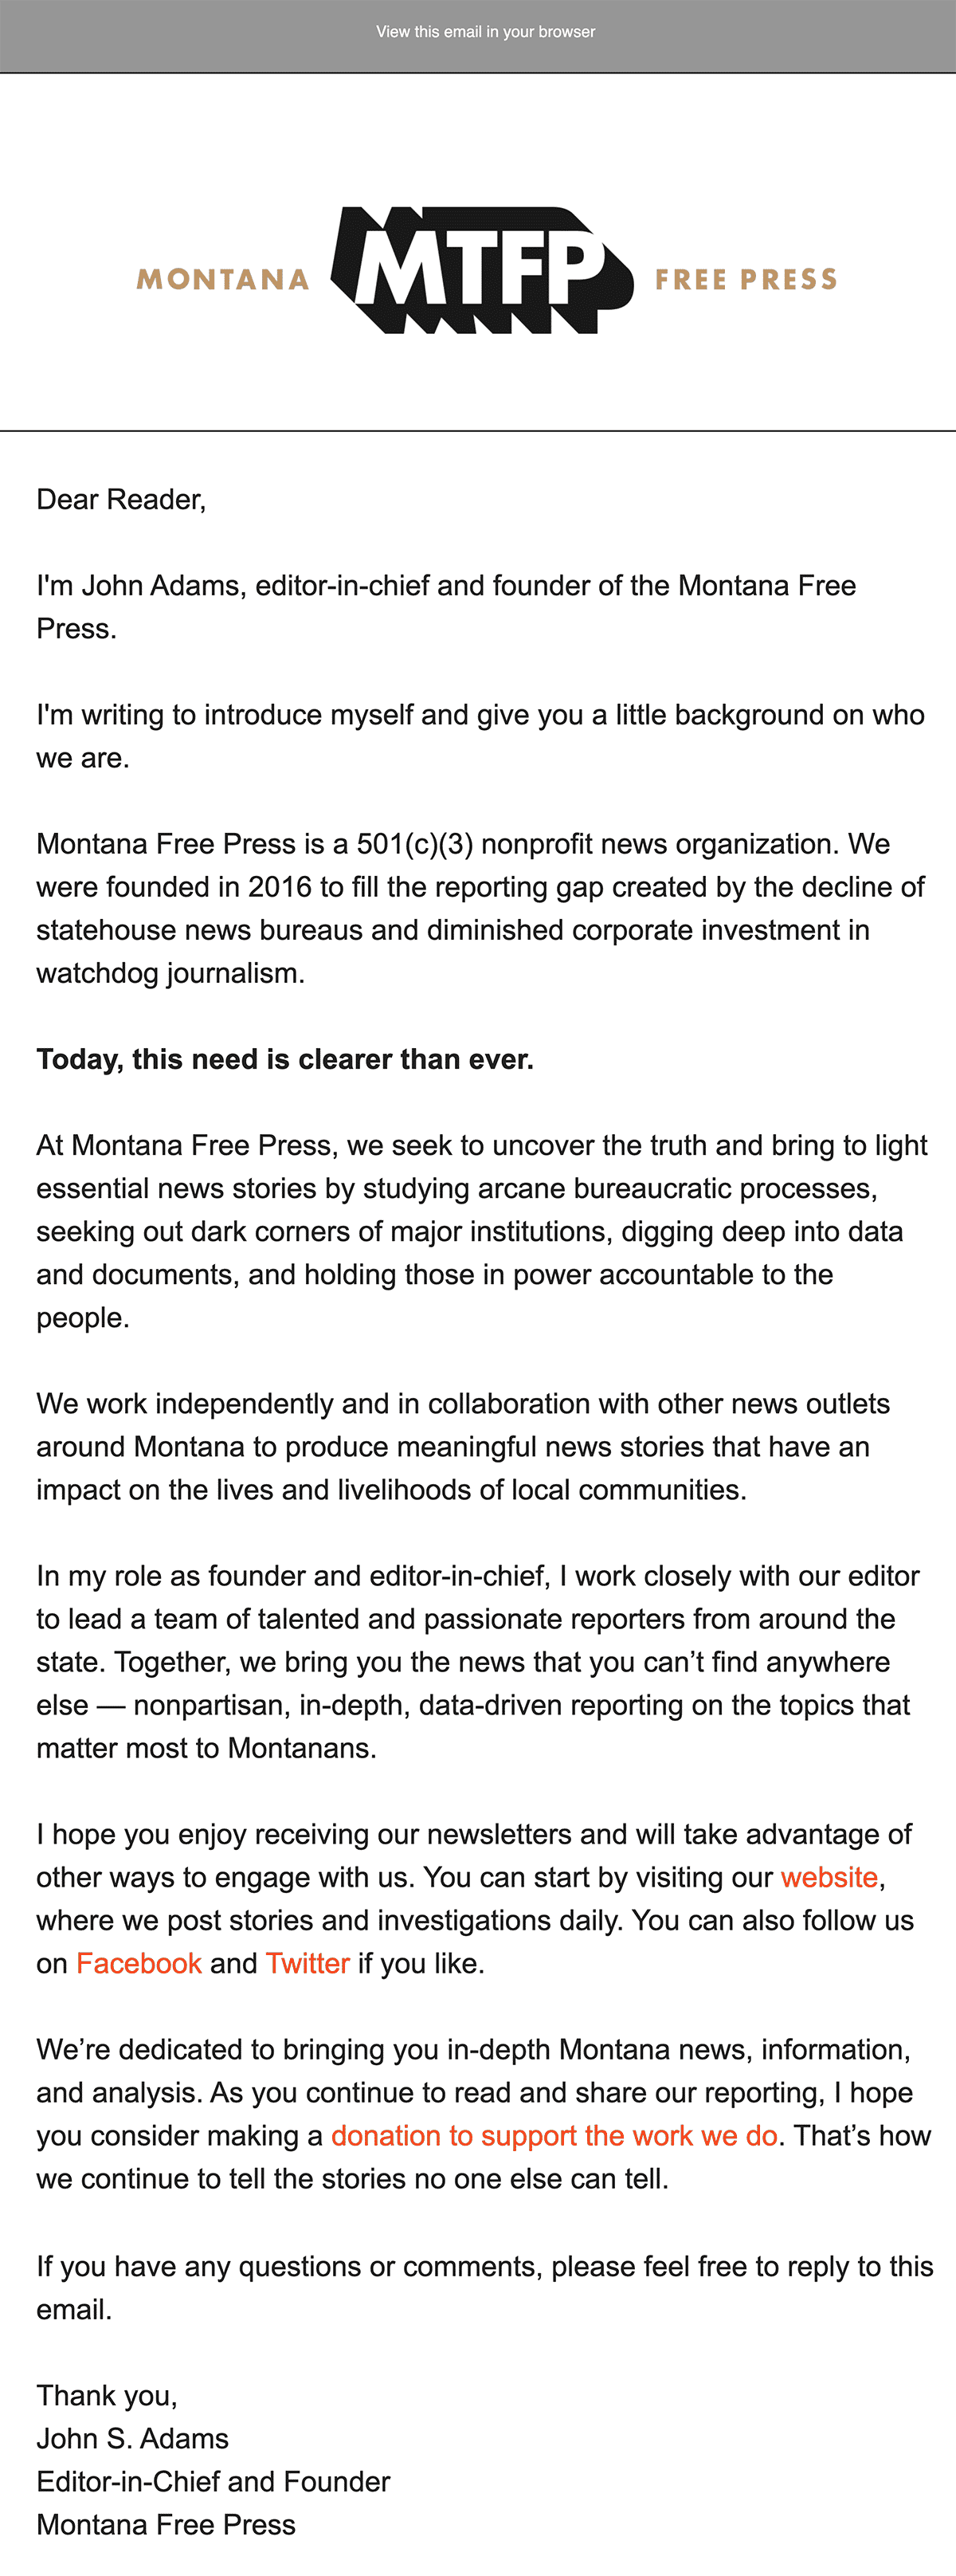 Montana Free Press Welcome Email 2022